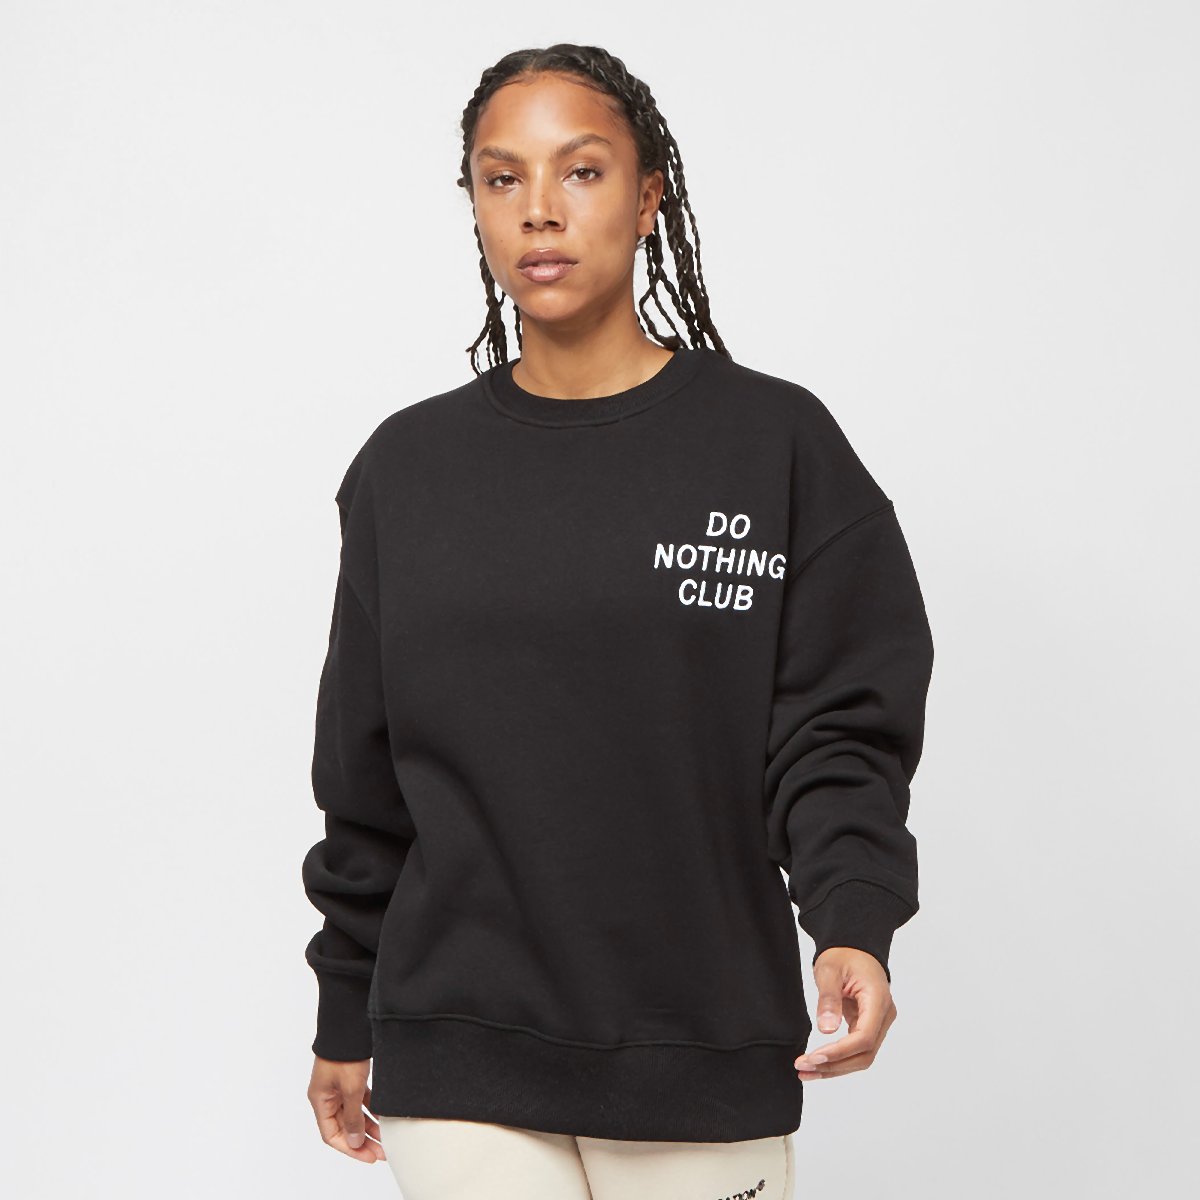 Do Nothing Club Sweater